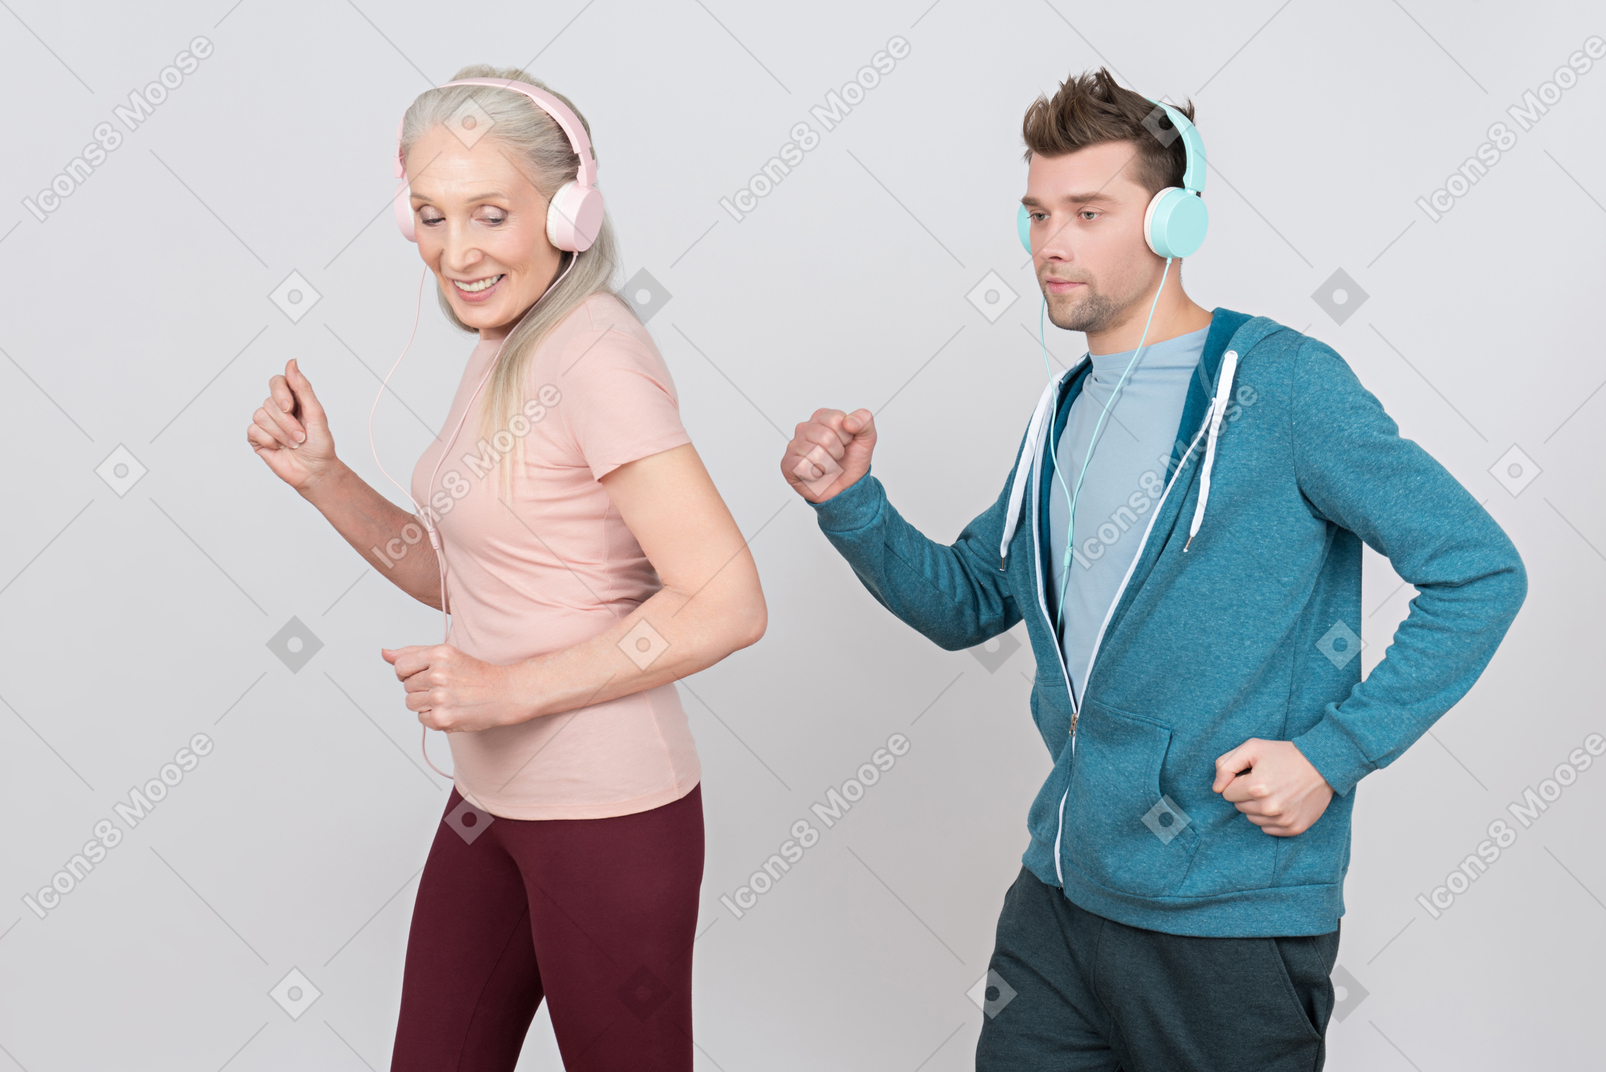 Old woman and young guy wearing headphones and running